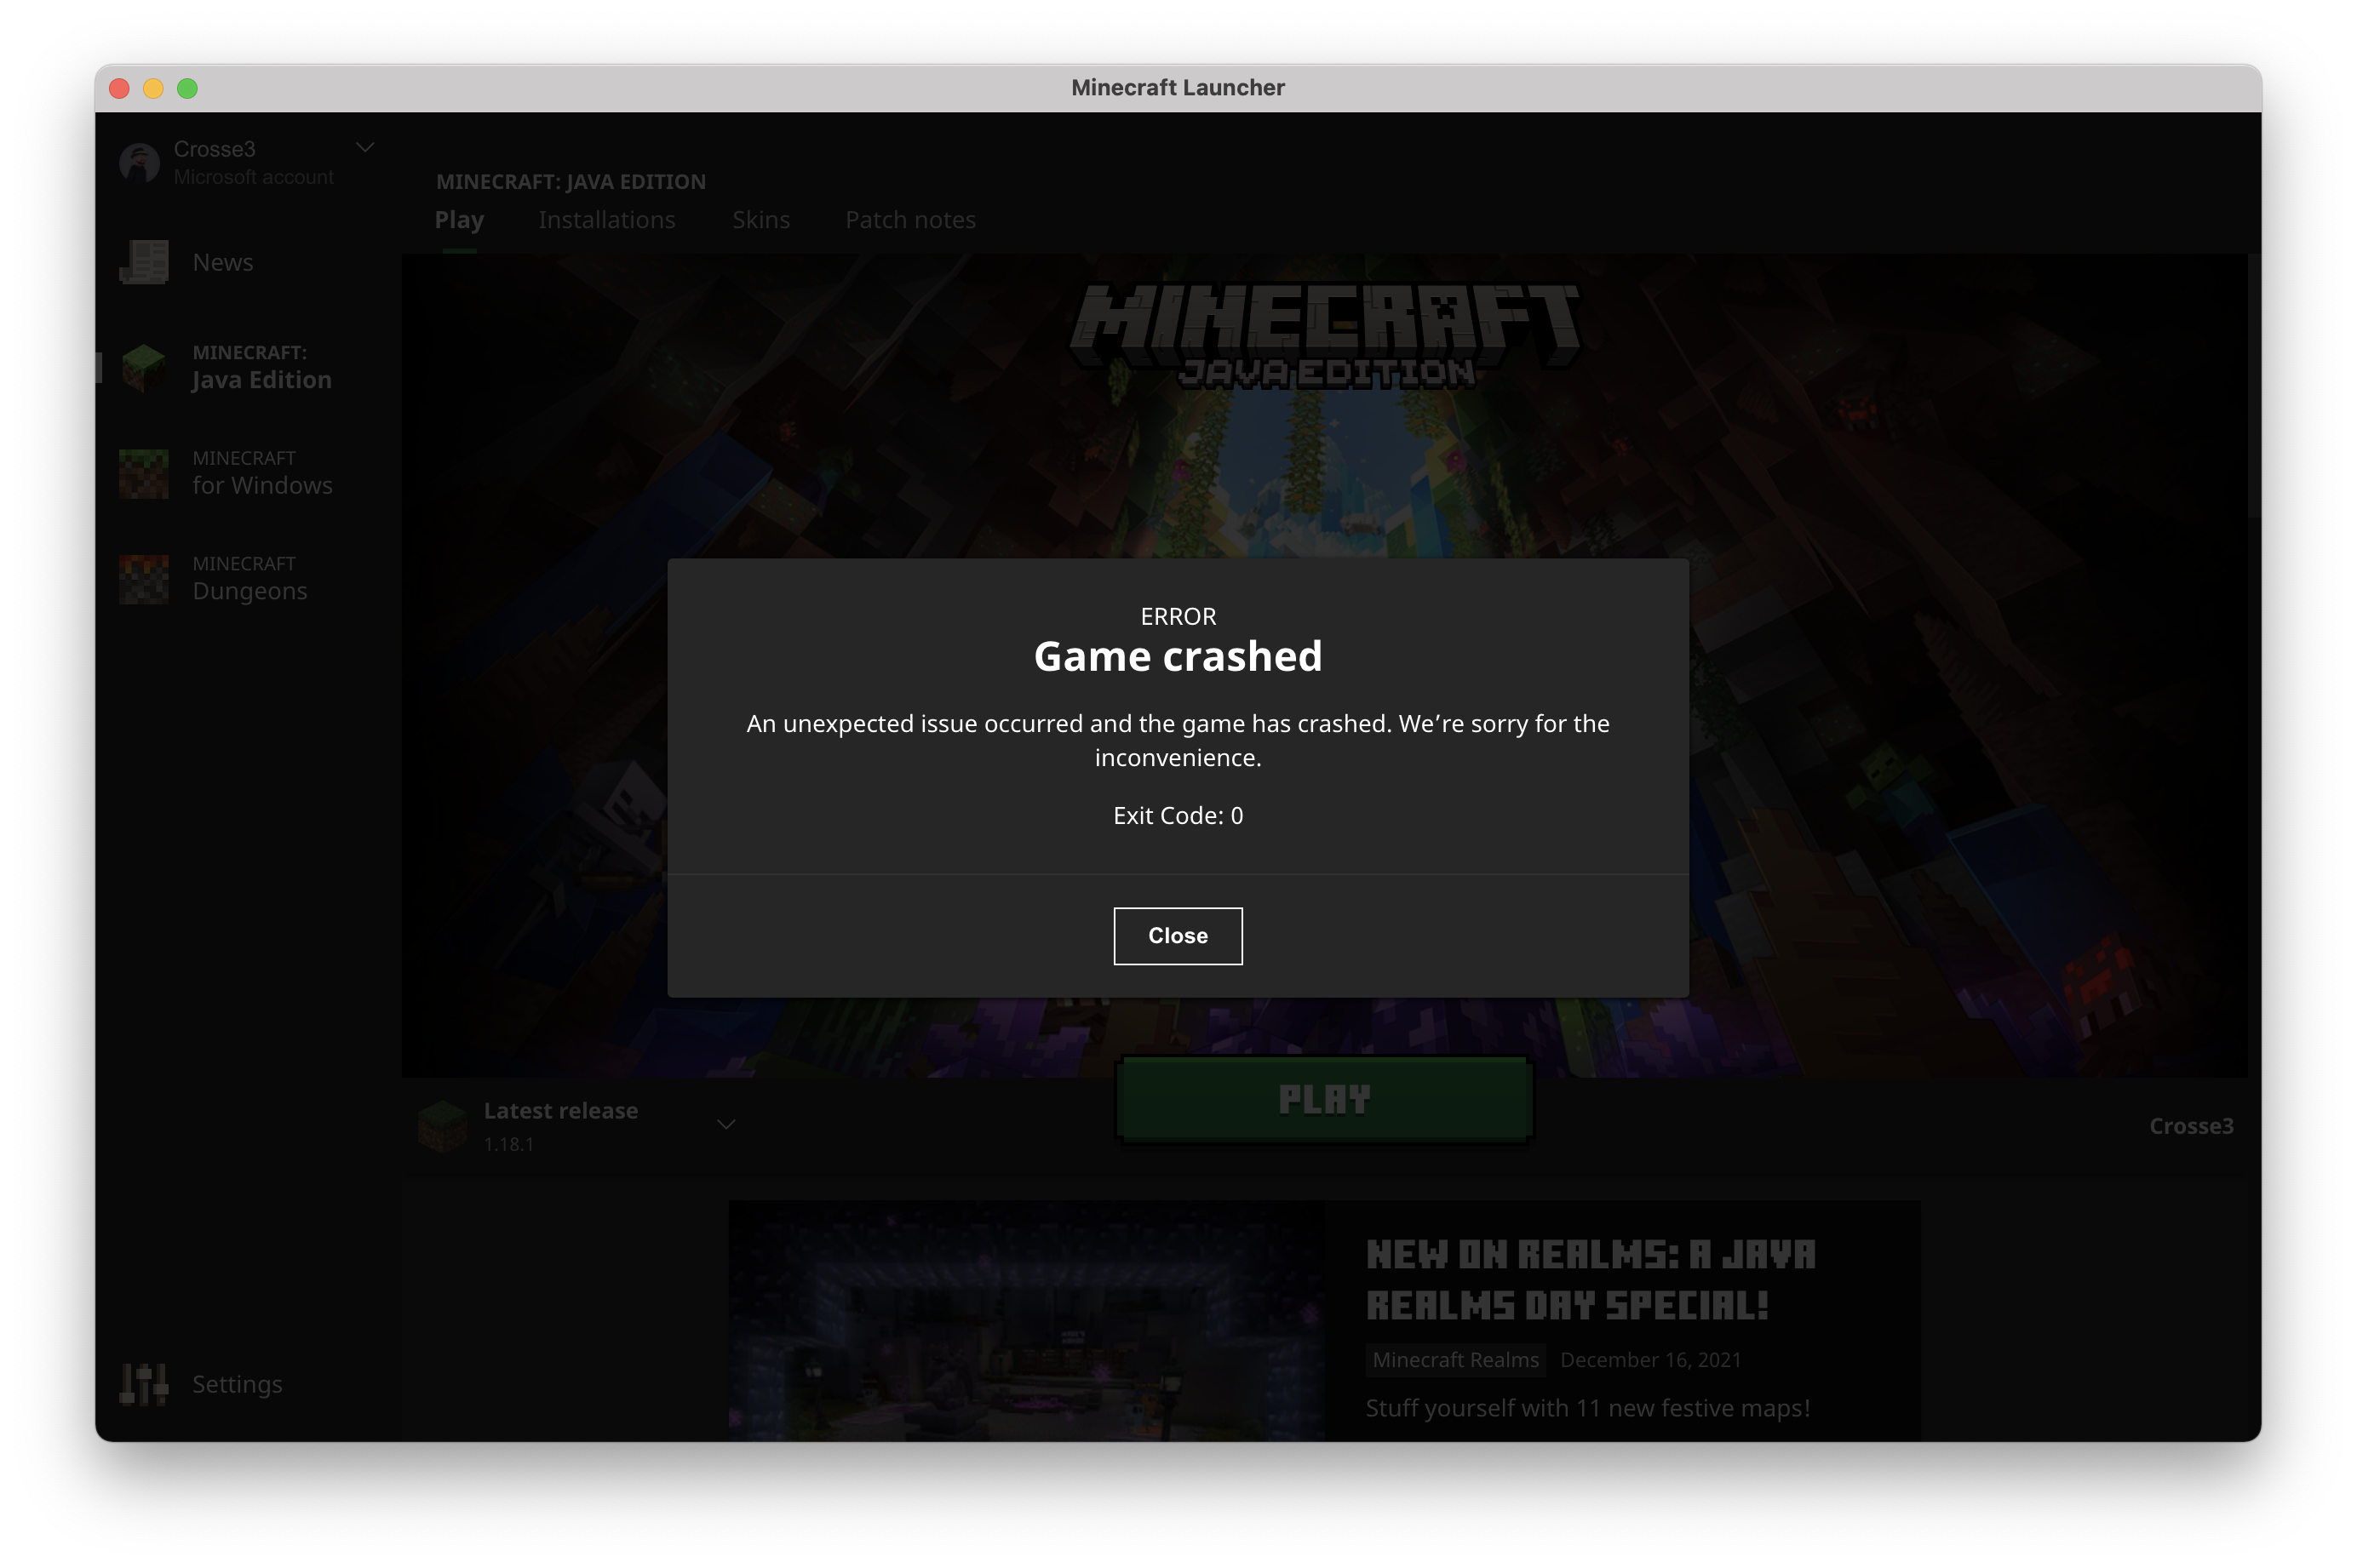 Minecraft launcher crashes on startup with an arm64 Java build